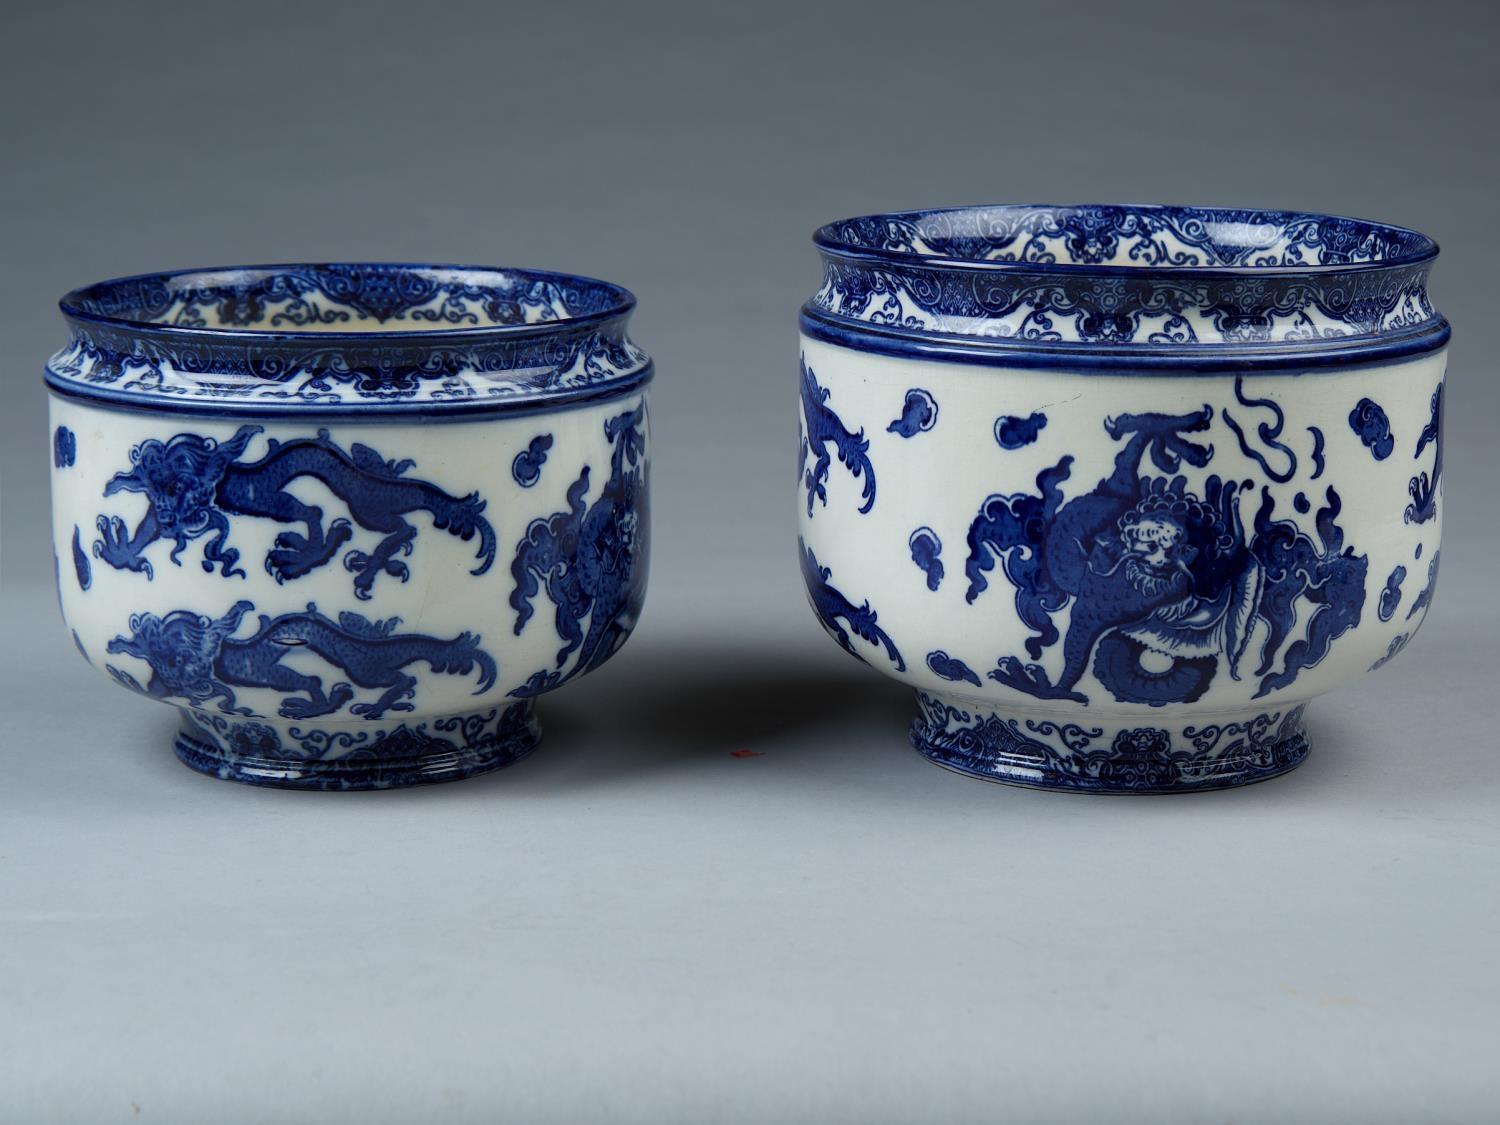 TWO GRADUATED ROYAL DOULTON BLUE PRINTED EARTHENWARE OYAMA PATTERN JARDINIERES, EARLY 20TH C, 16 AND